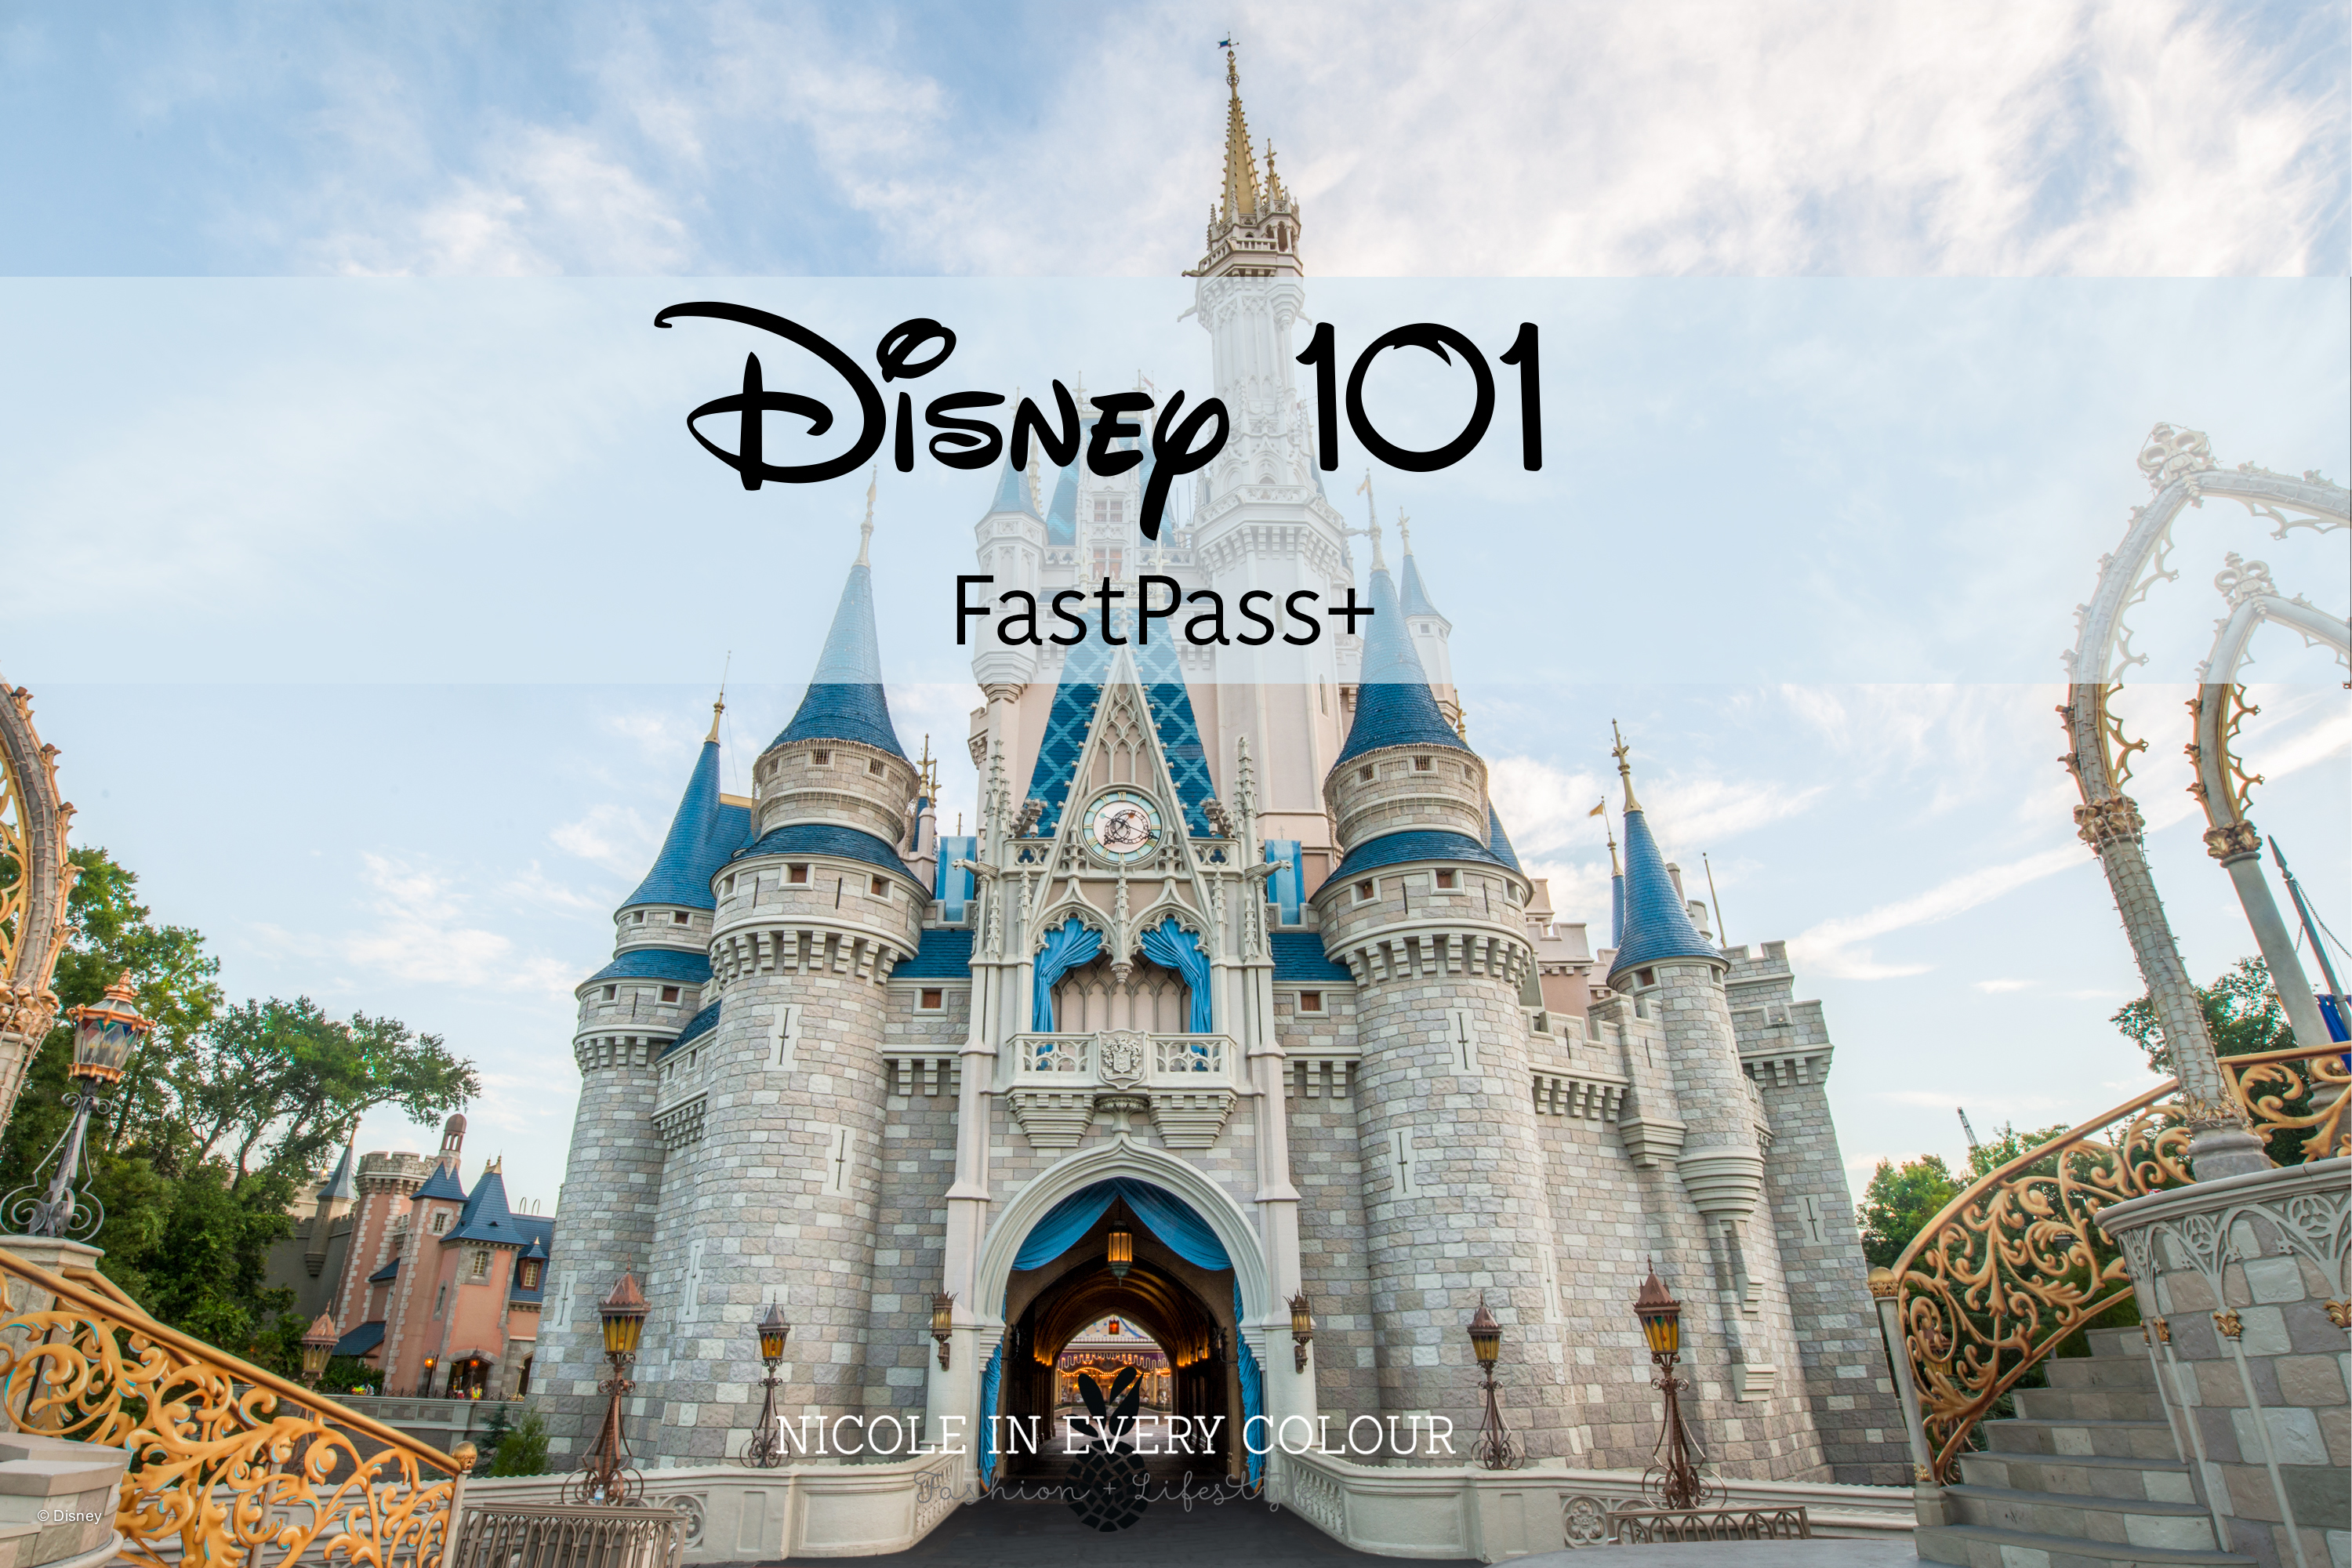 disney-101-fastpass-plus-park-tickets-dream-vacay-mickey-mouse-blogger